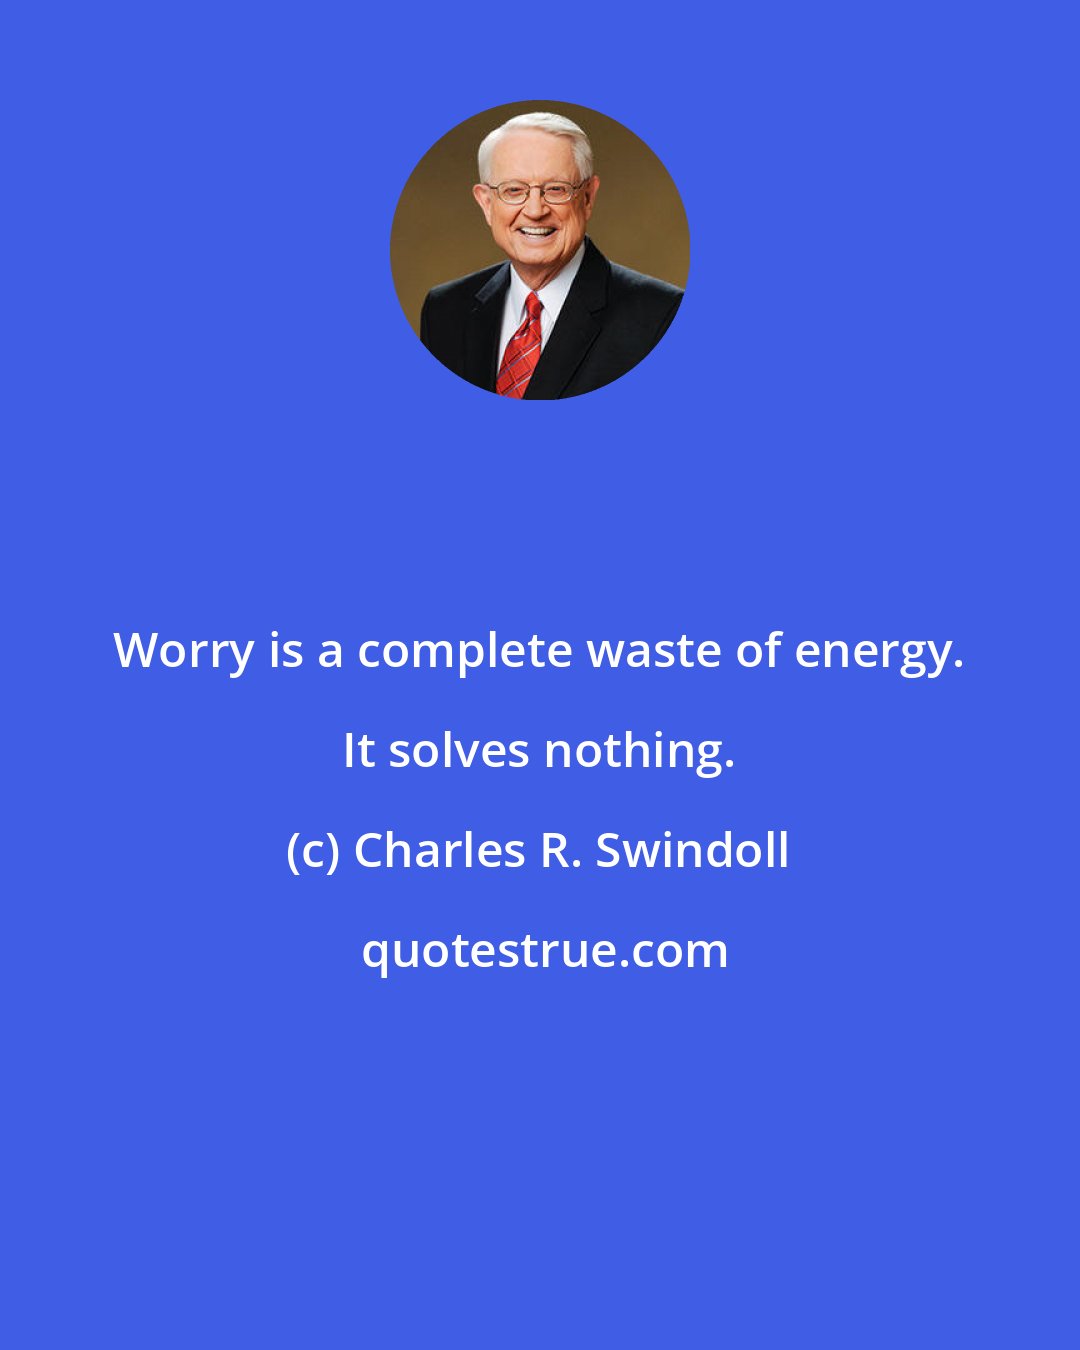 Charles R. Swindoll: Worry is a complete waste of energy. It solves nothing.